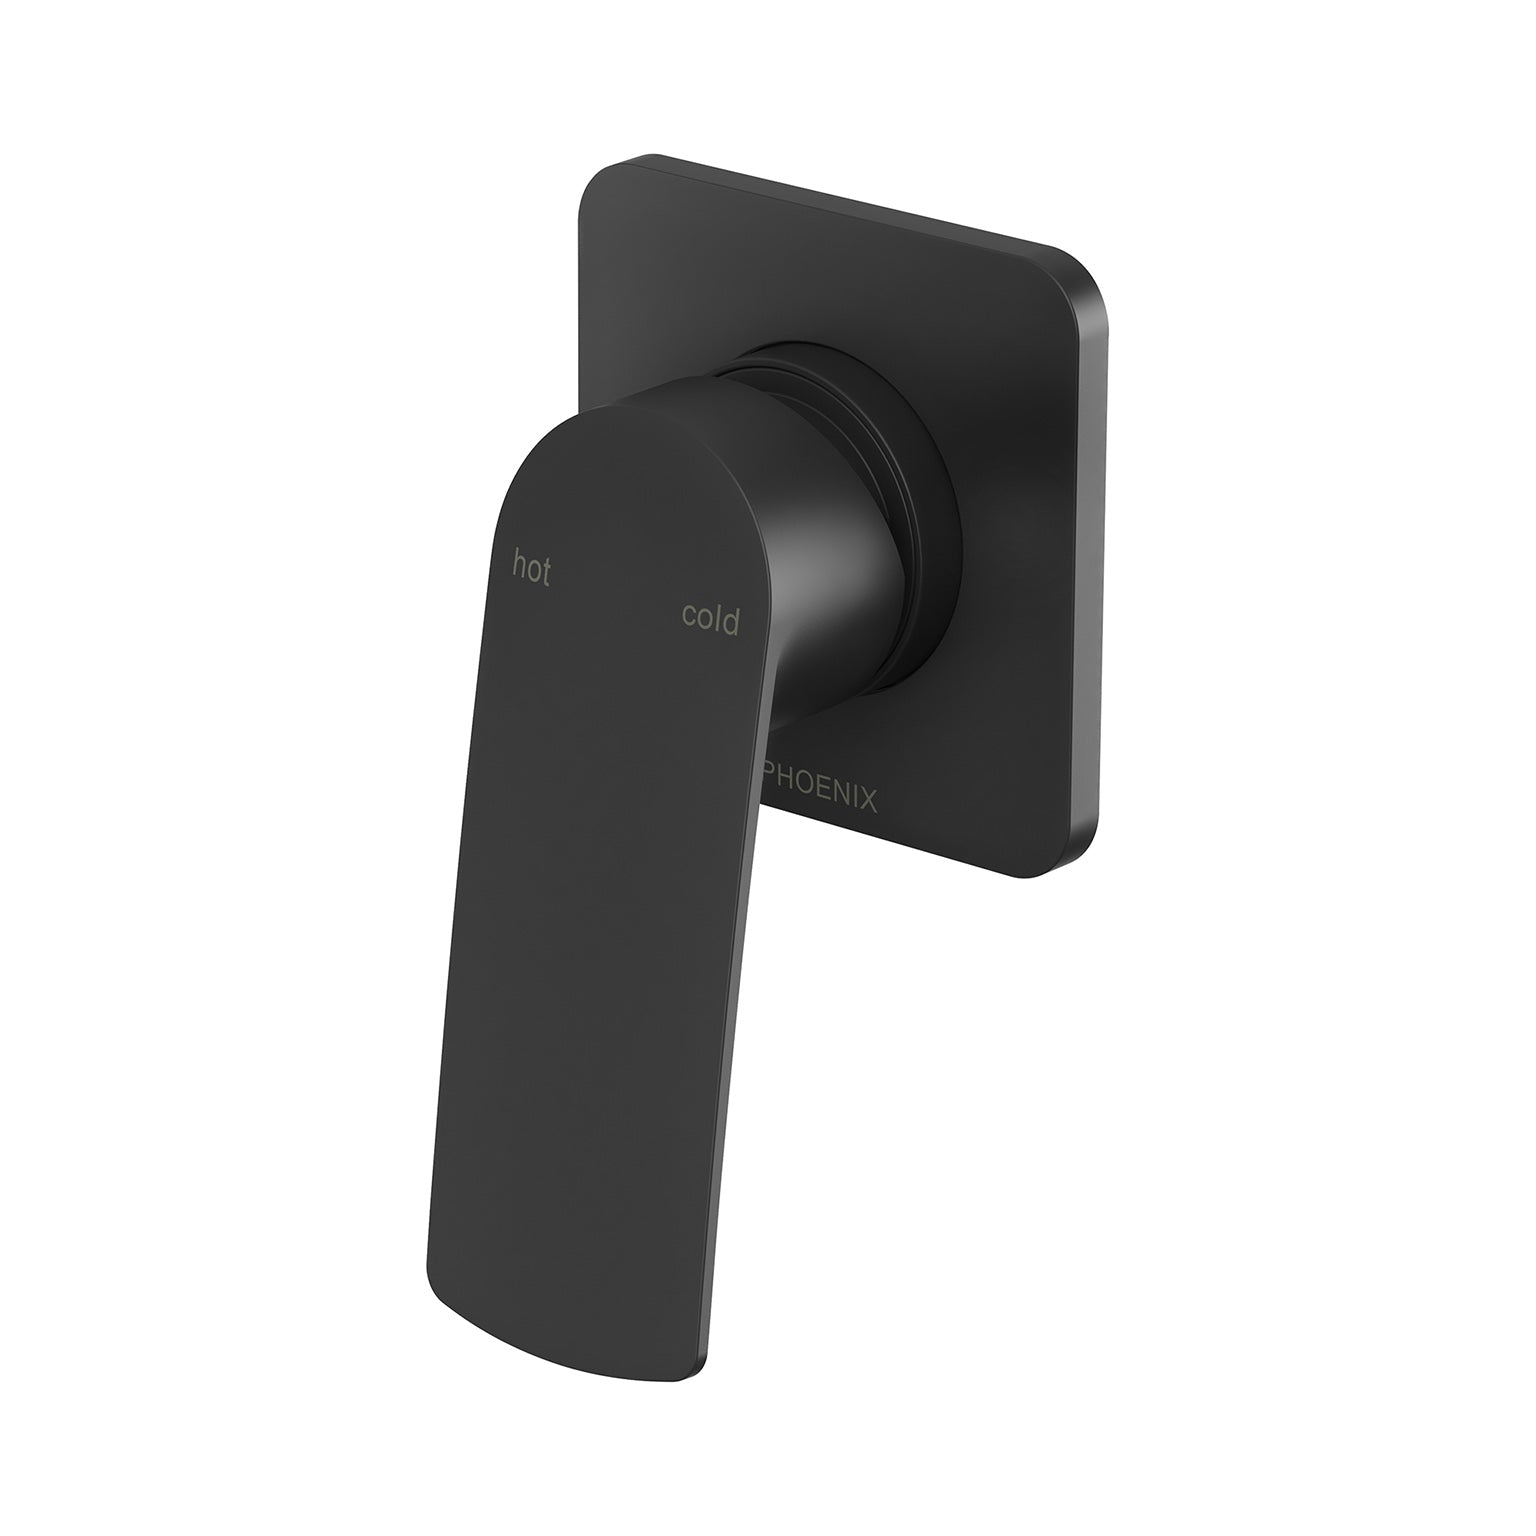 PHOENIX MEKKO SWITCHMIX WALL MIXER W/ SQUARE BACKPLATE FIT-OFF AND ROUGH-IN KIT MATTE BLACK